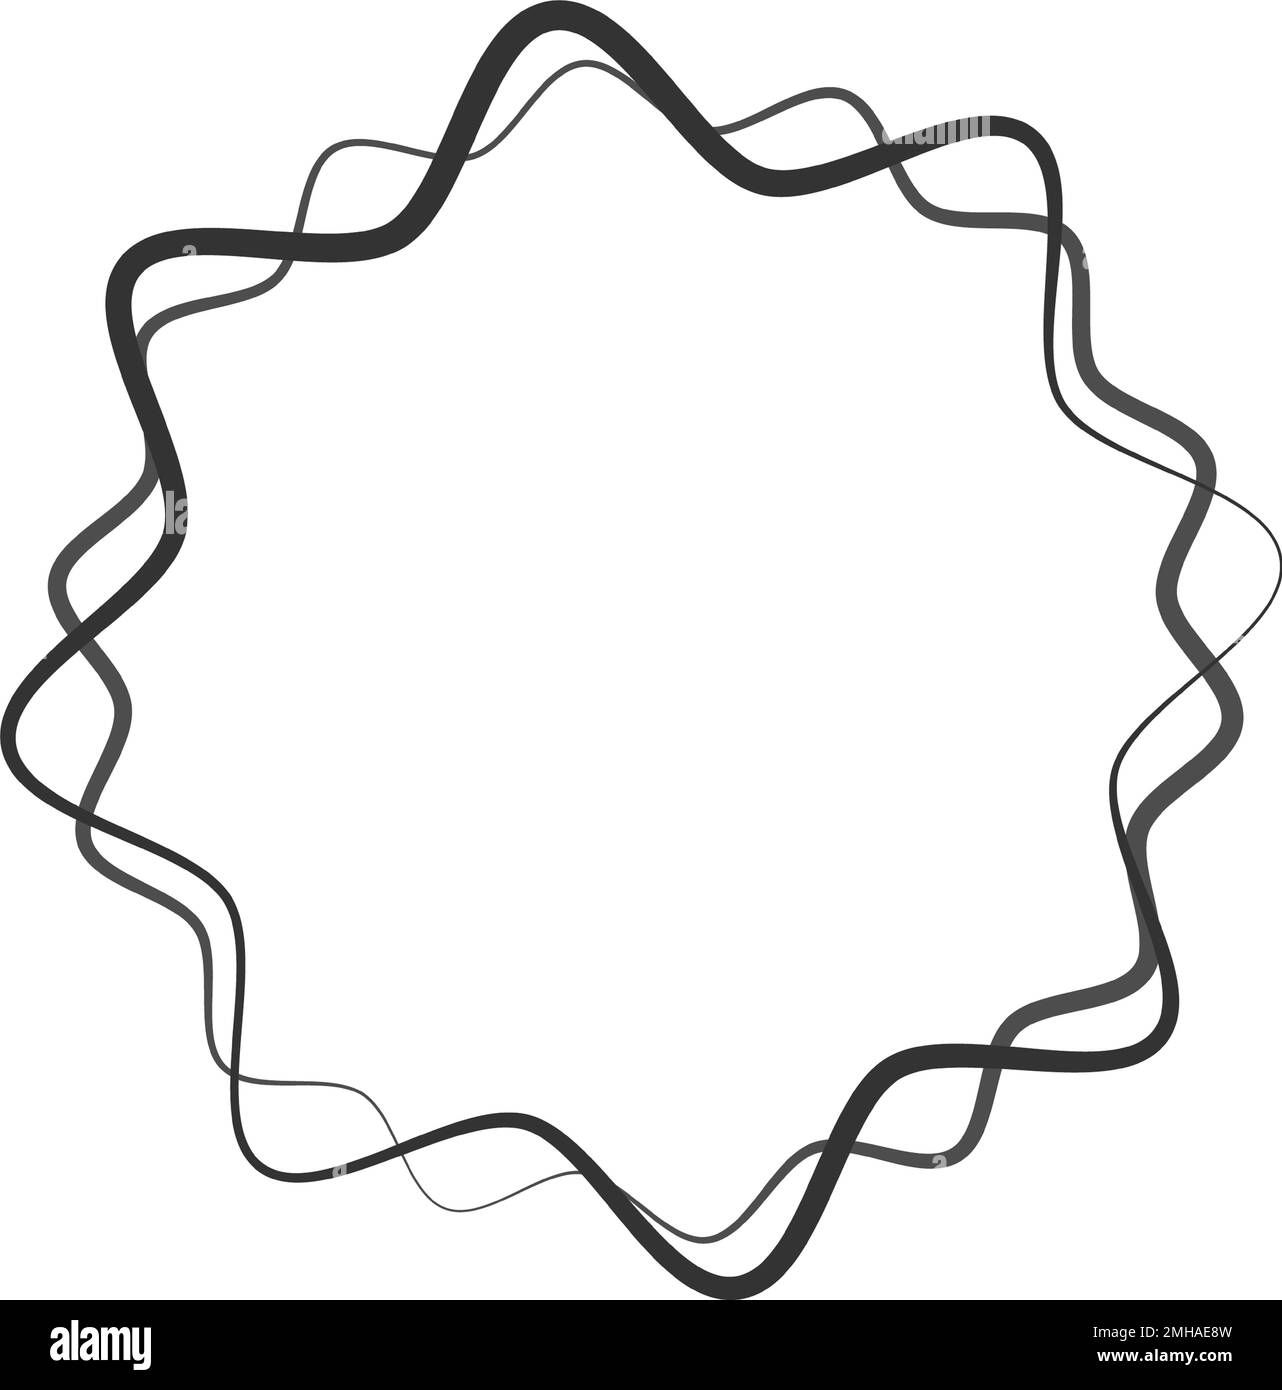 frame of wavy circles overlapping together Stock Photo